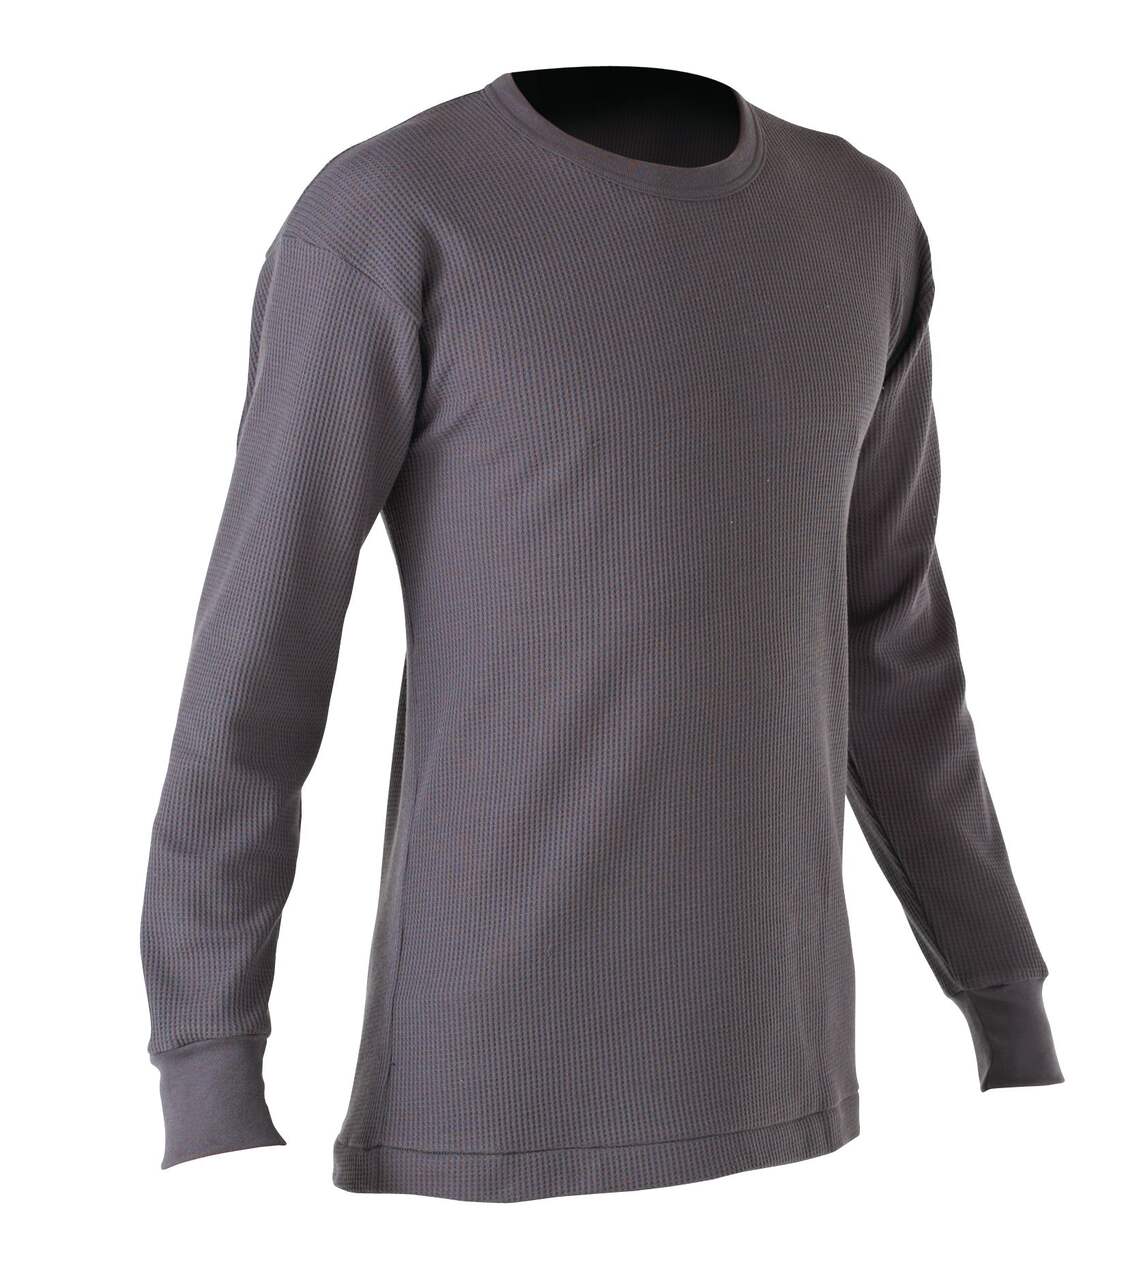 WindRiver Men's Thermal Stretch Freshtech Long Sleeve Waffle Top